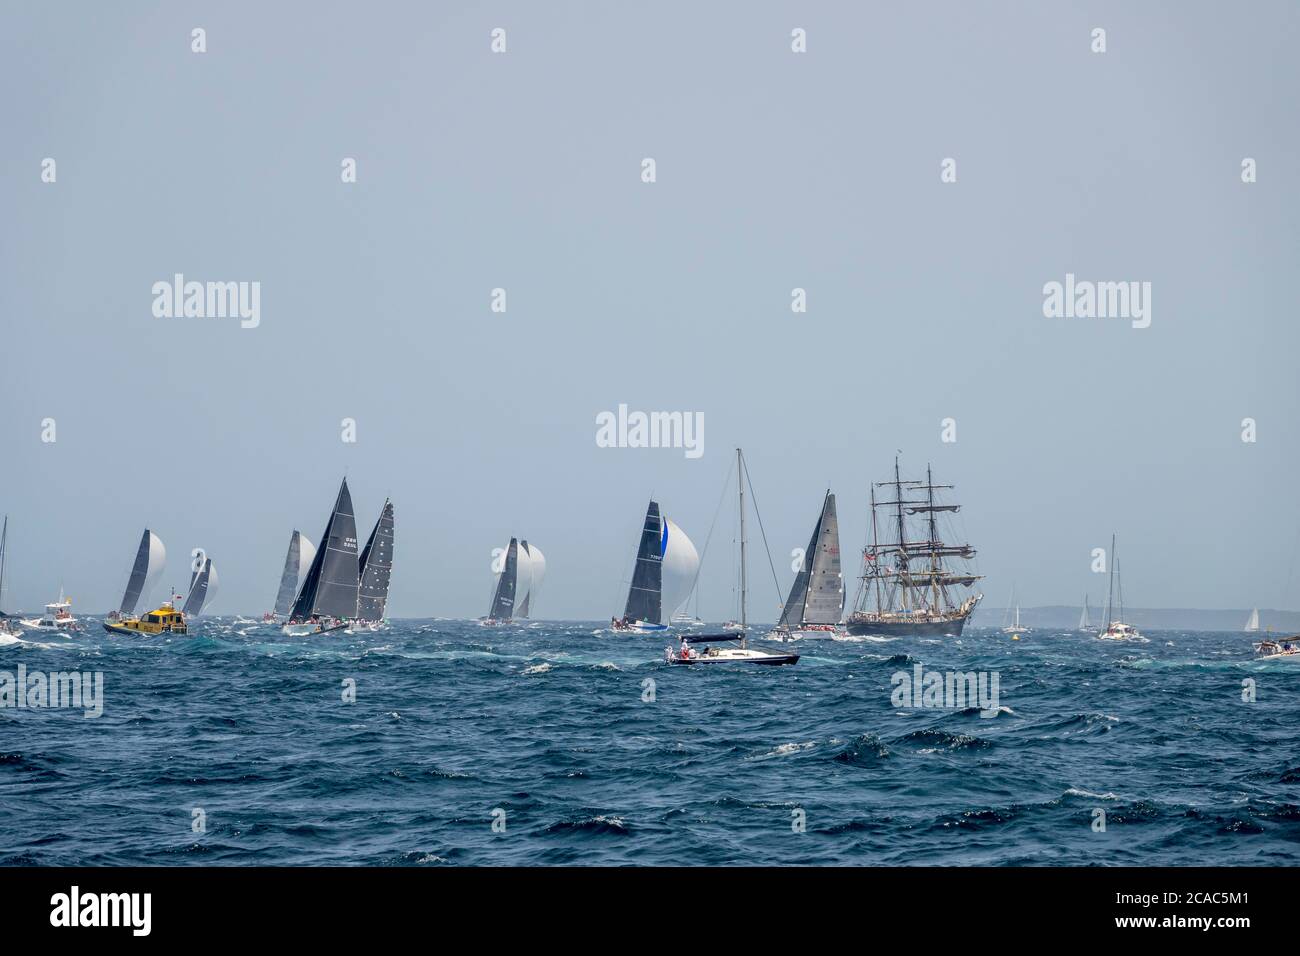 2019 Sydney to Hobart Yacht Race competitors 'Frantic' and 'Oskana' passing South Head into Tasman Sea after race start, New South Wales, Australia Stock Photo